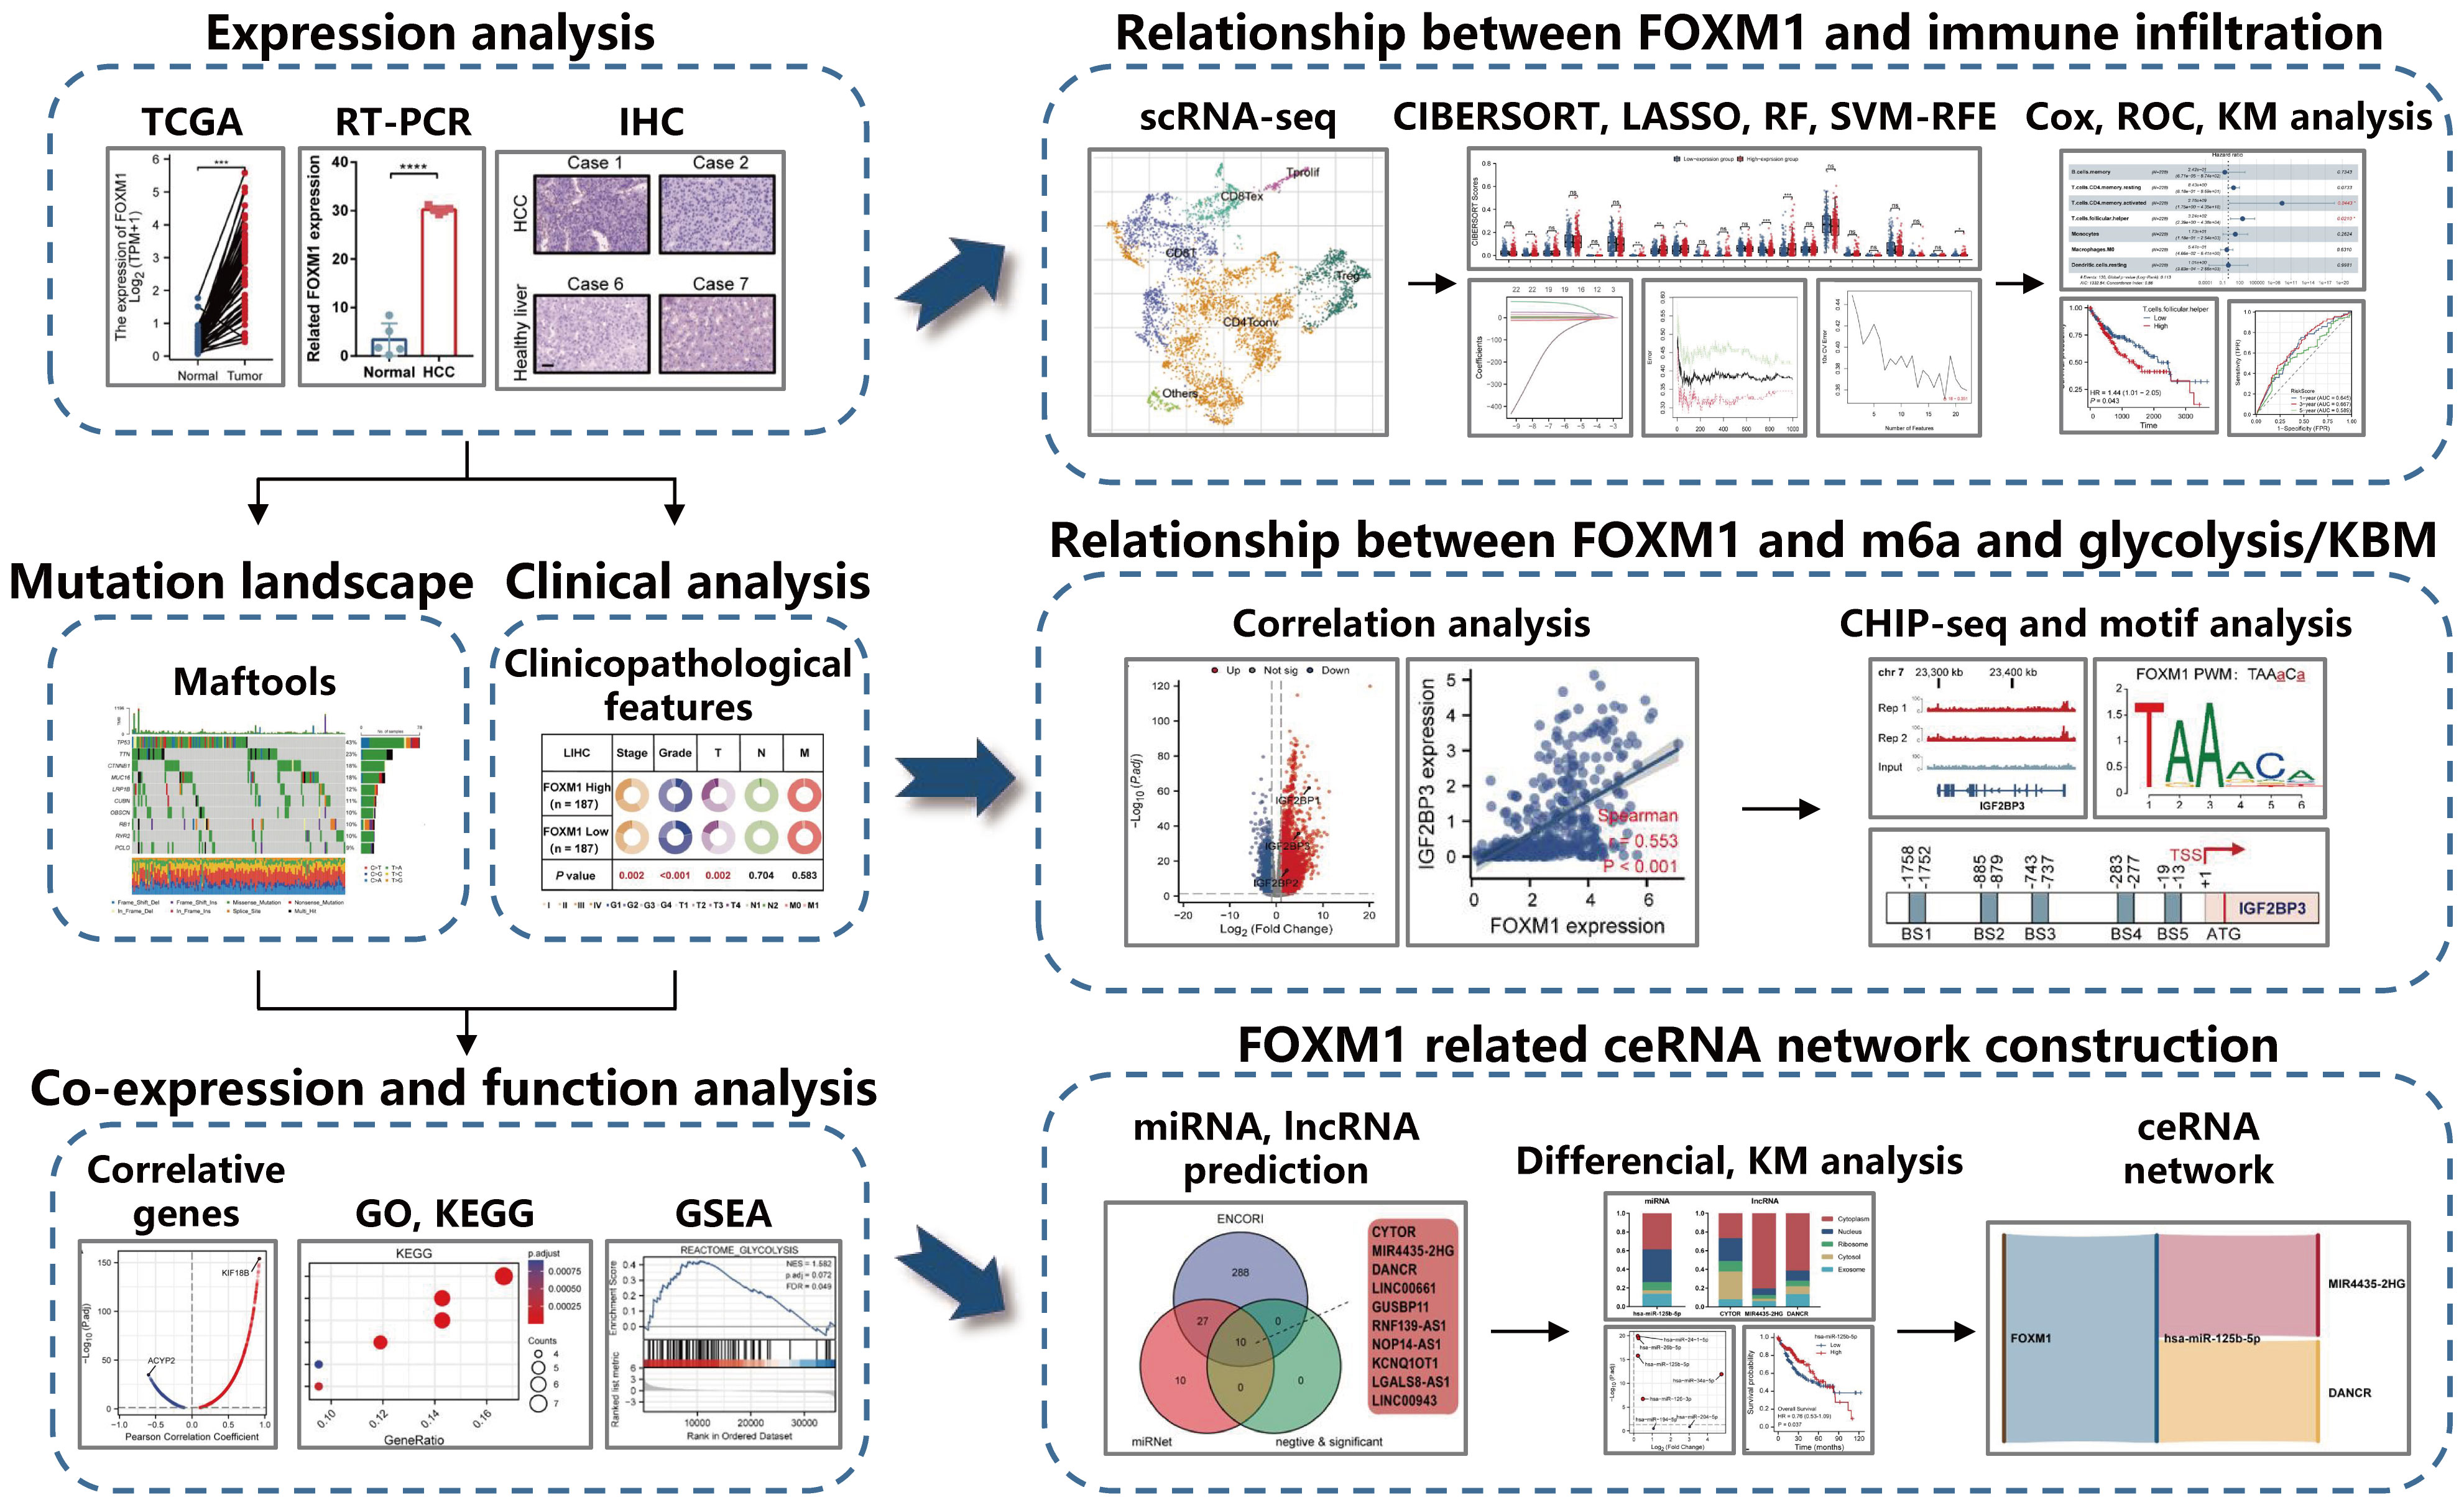 Frontiers | Comprehensive analysis of FOXM1 immune infiltrates 